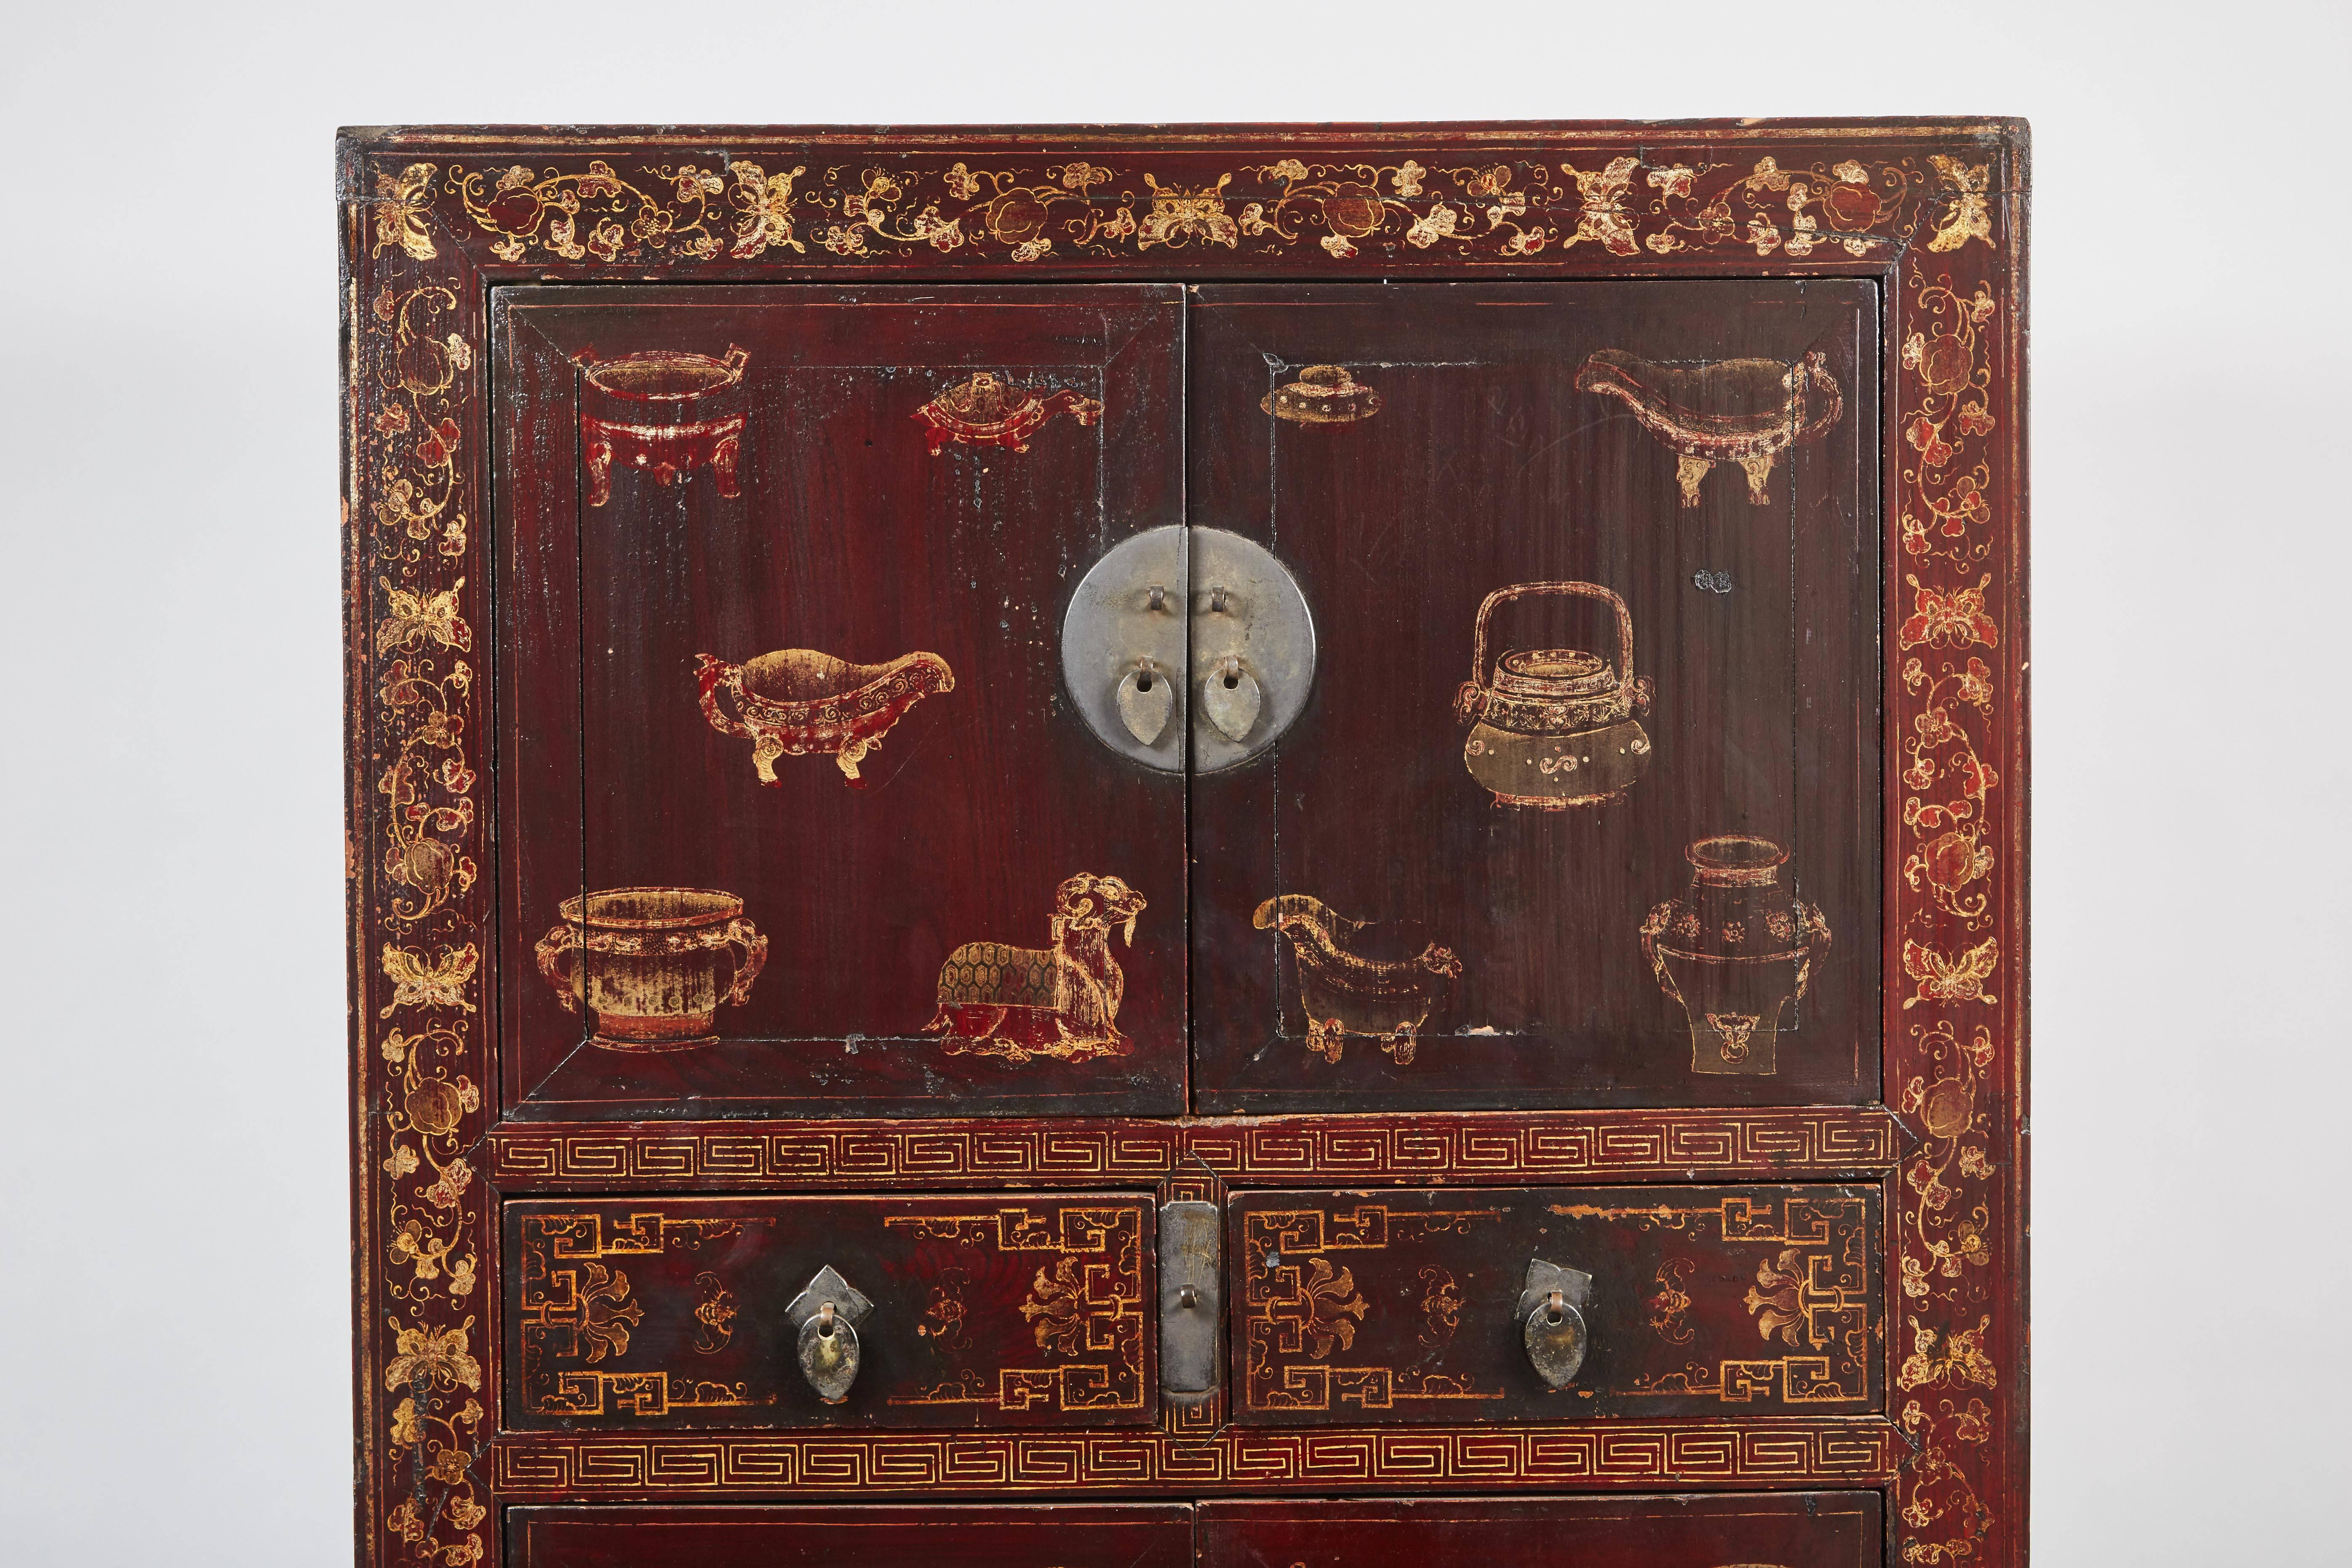 A 18th century oxblood lacquered Chinese cabinet with chinoiserie in the front. The cabinet has two small doors on top, just below are two small drawers and below that are larger doors.